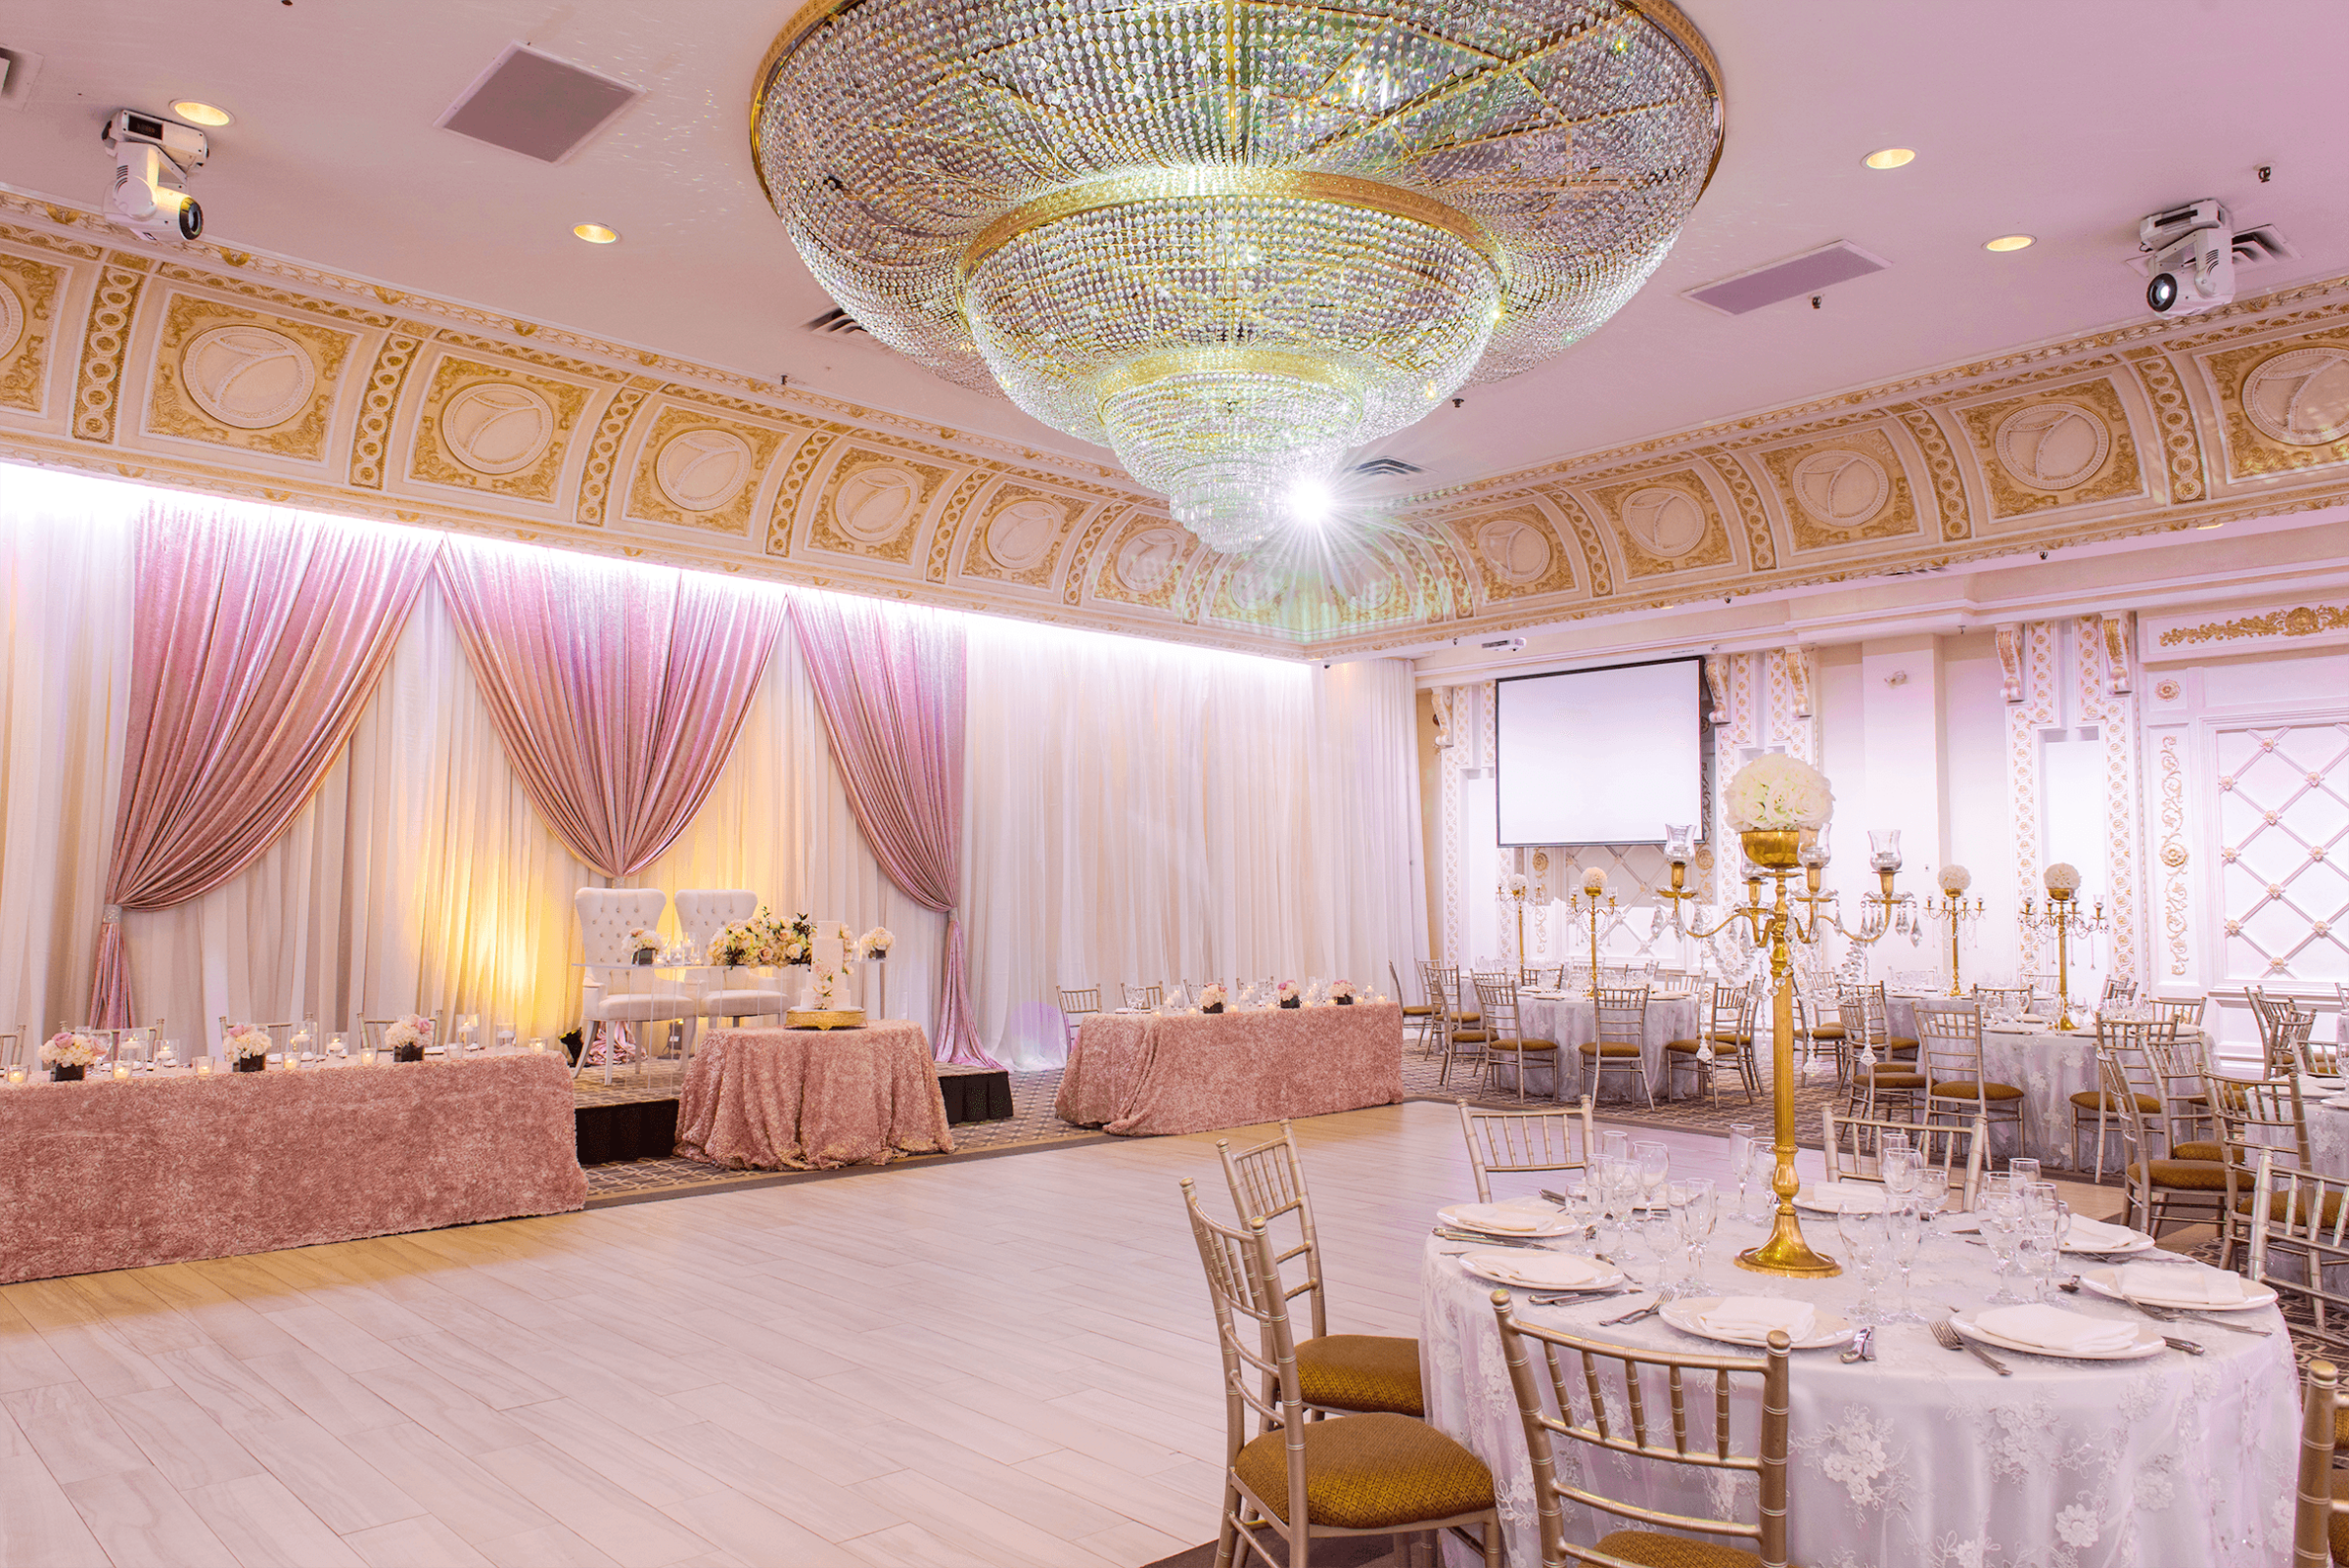 The Queen Victoria venue at Paradise Banquet Halls with a large dance floor, tables and chairs, and a head table.